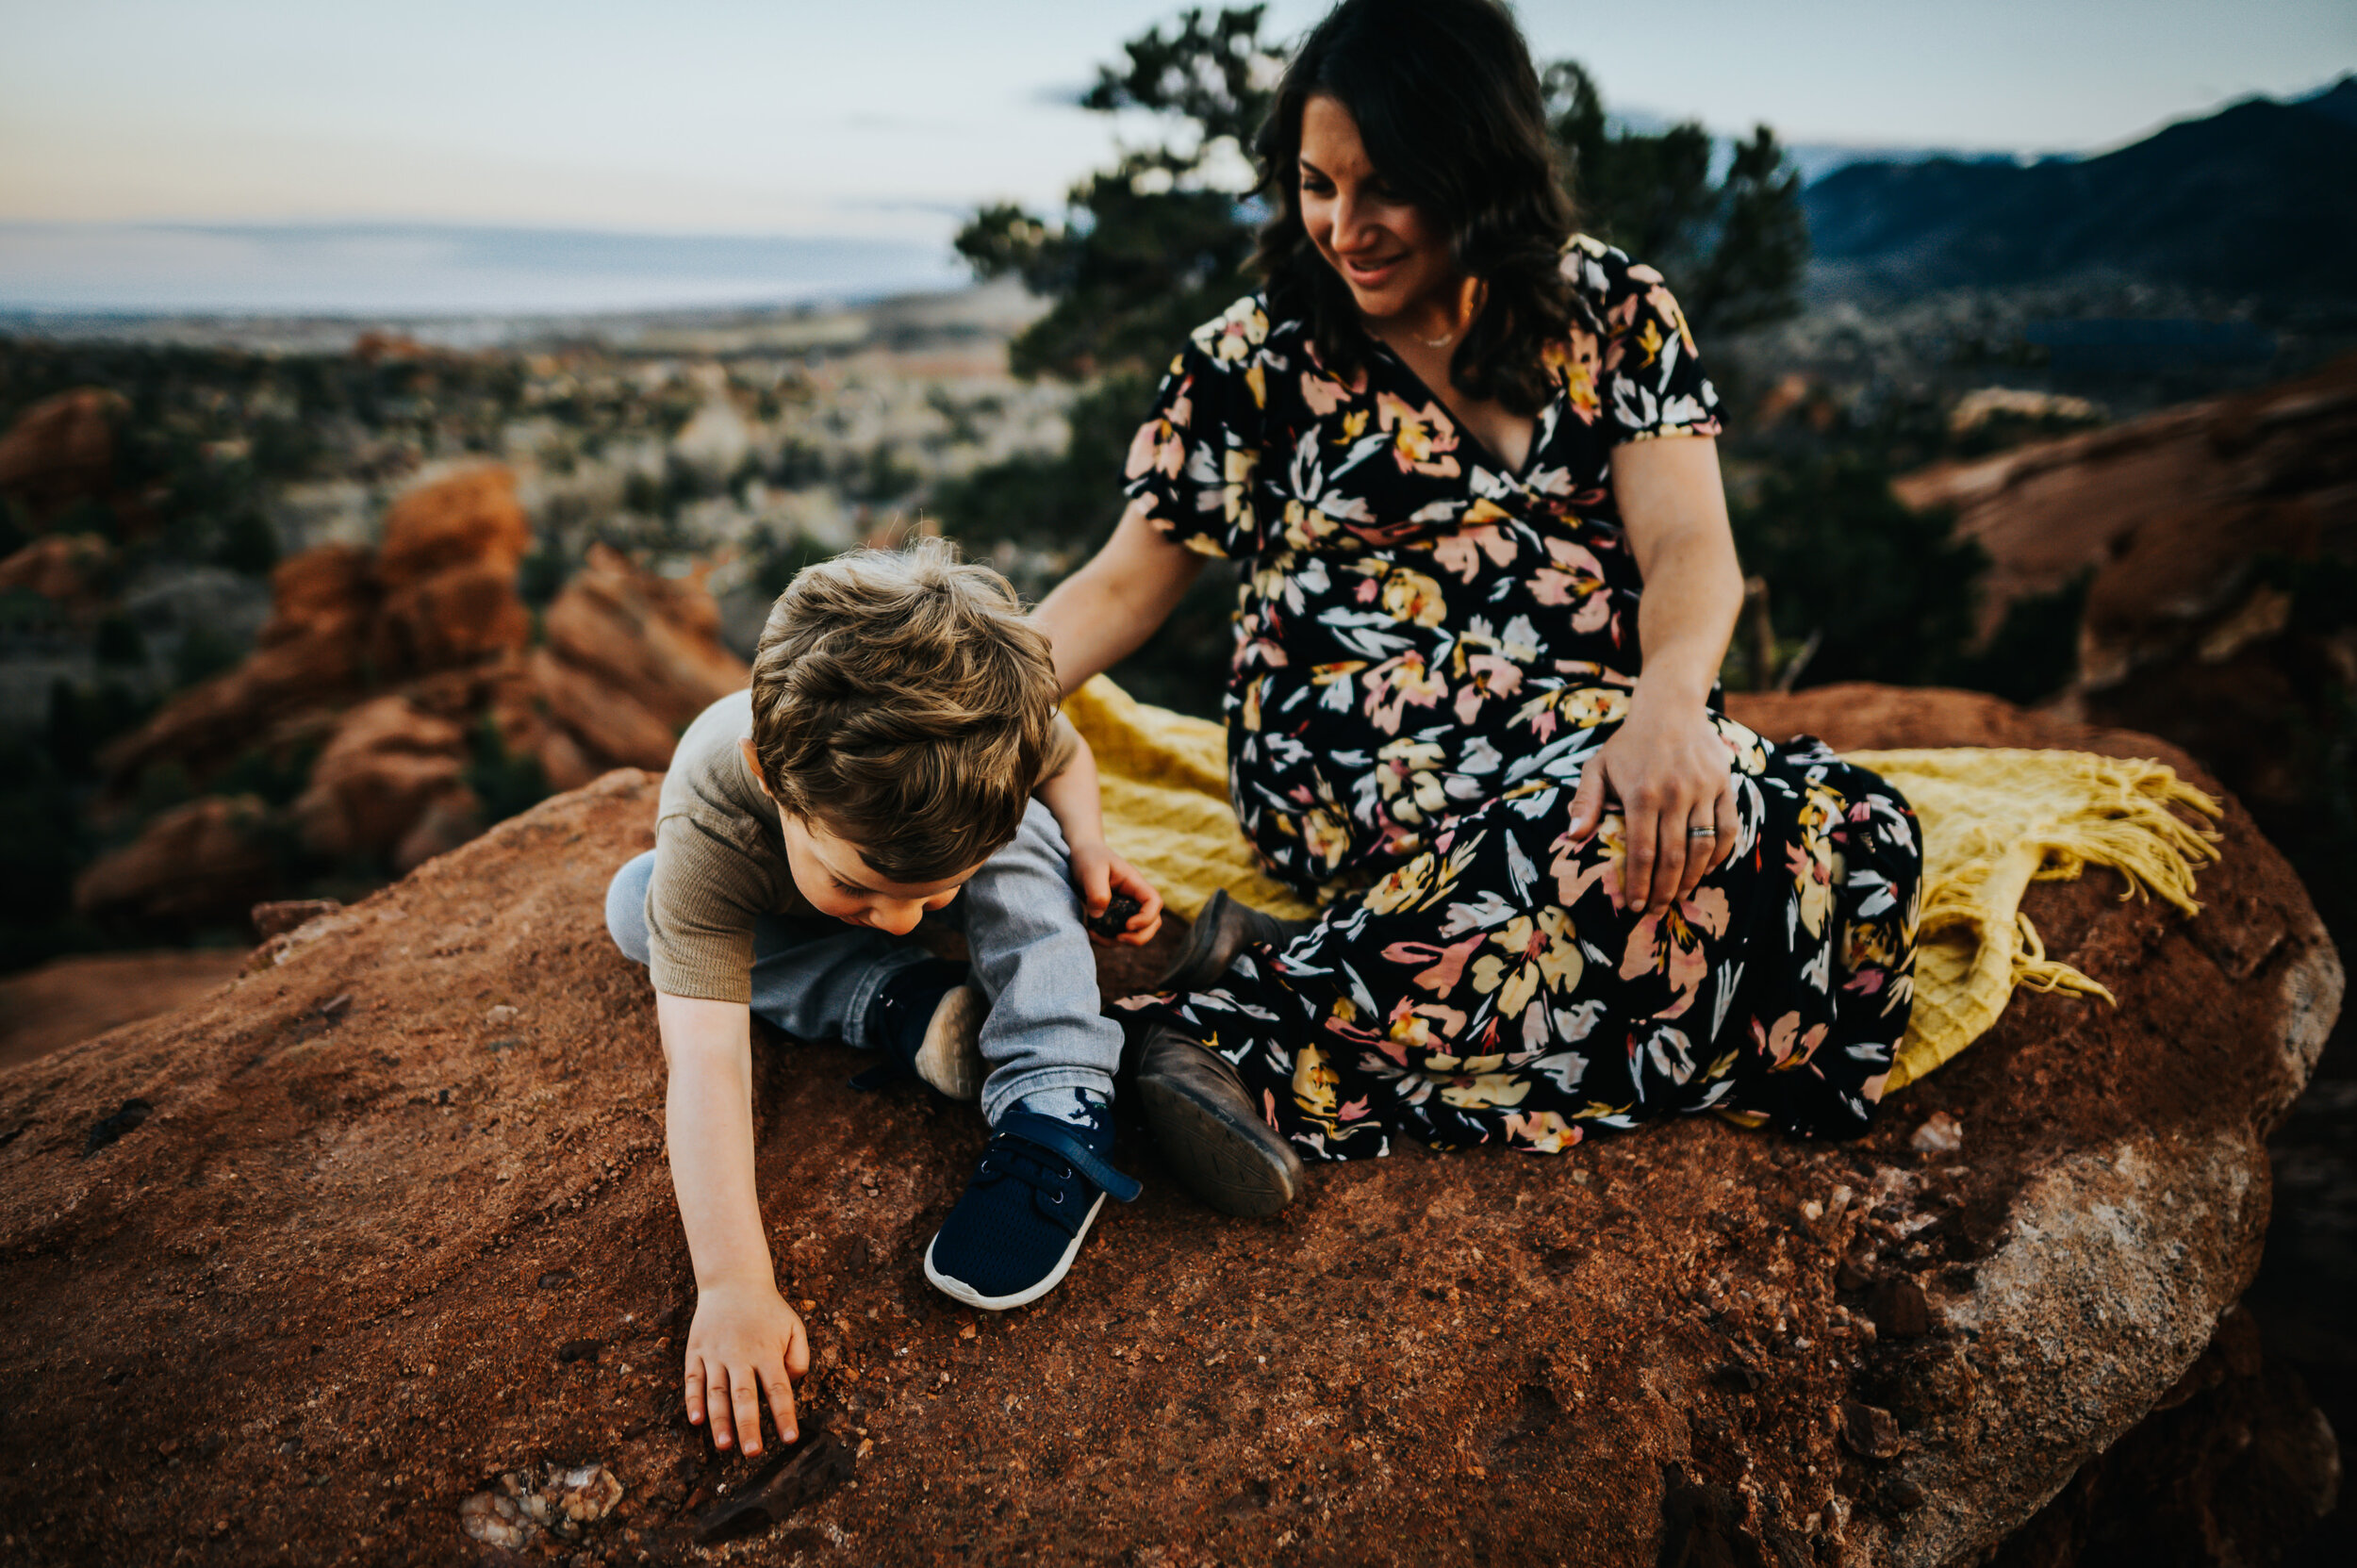 Andrea Grimm Maternity Family Session Colorado Springs Sunset Garden of the Gods Wild Prairie Photography-21-2020.jpg